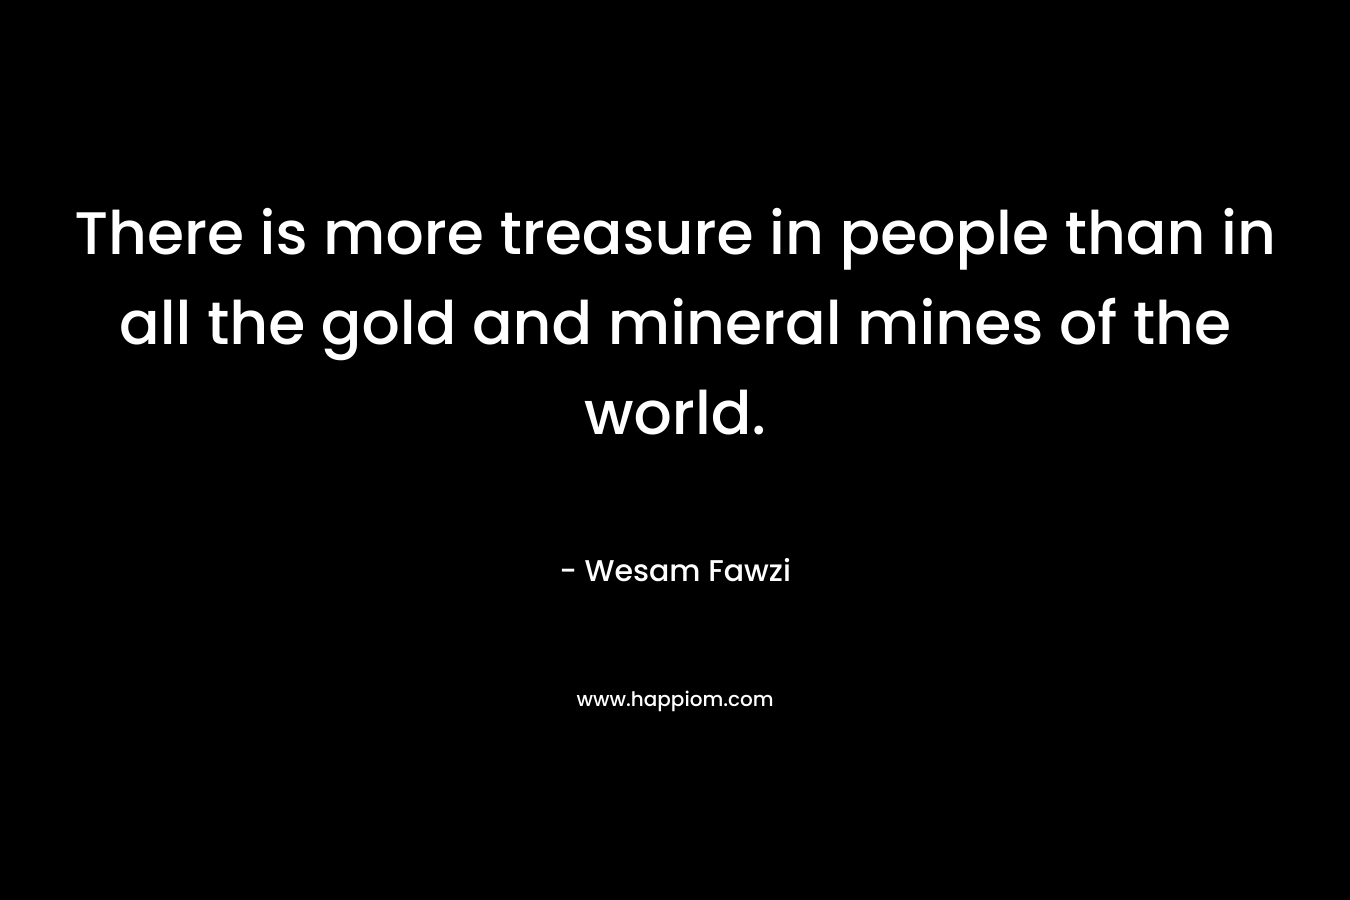 There is more treasure in people than in all the gold and mineral mines of the world.